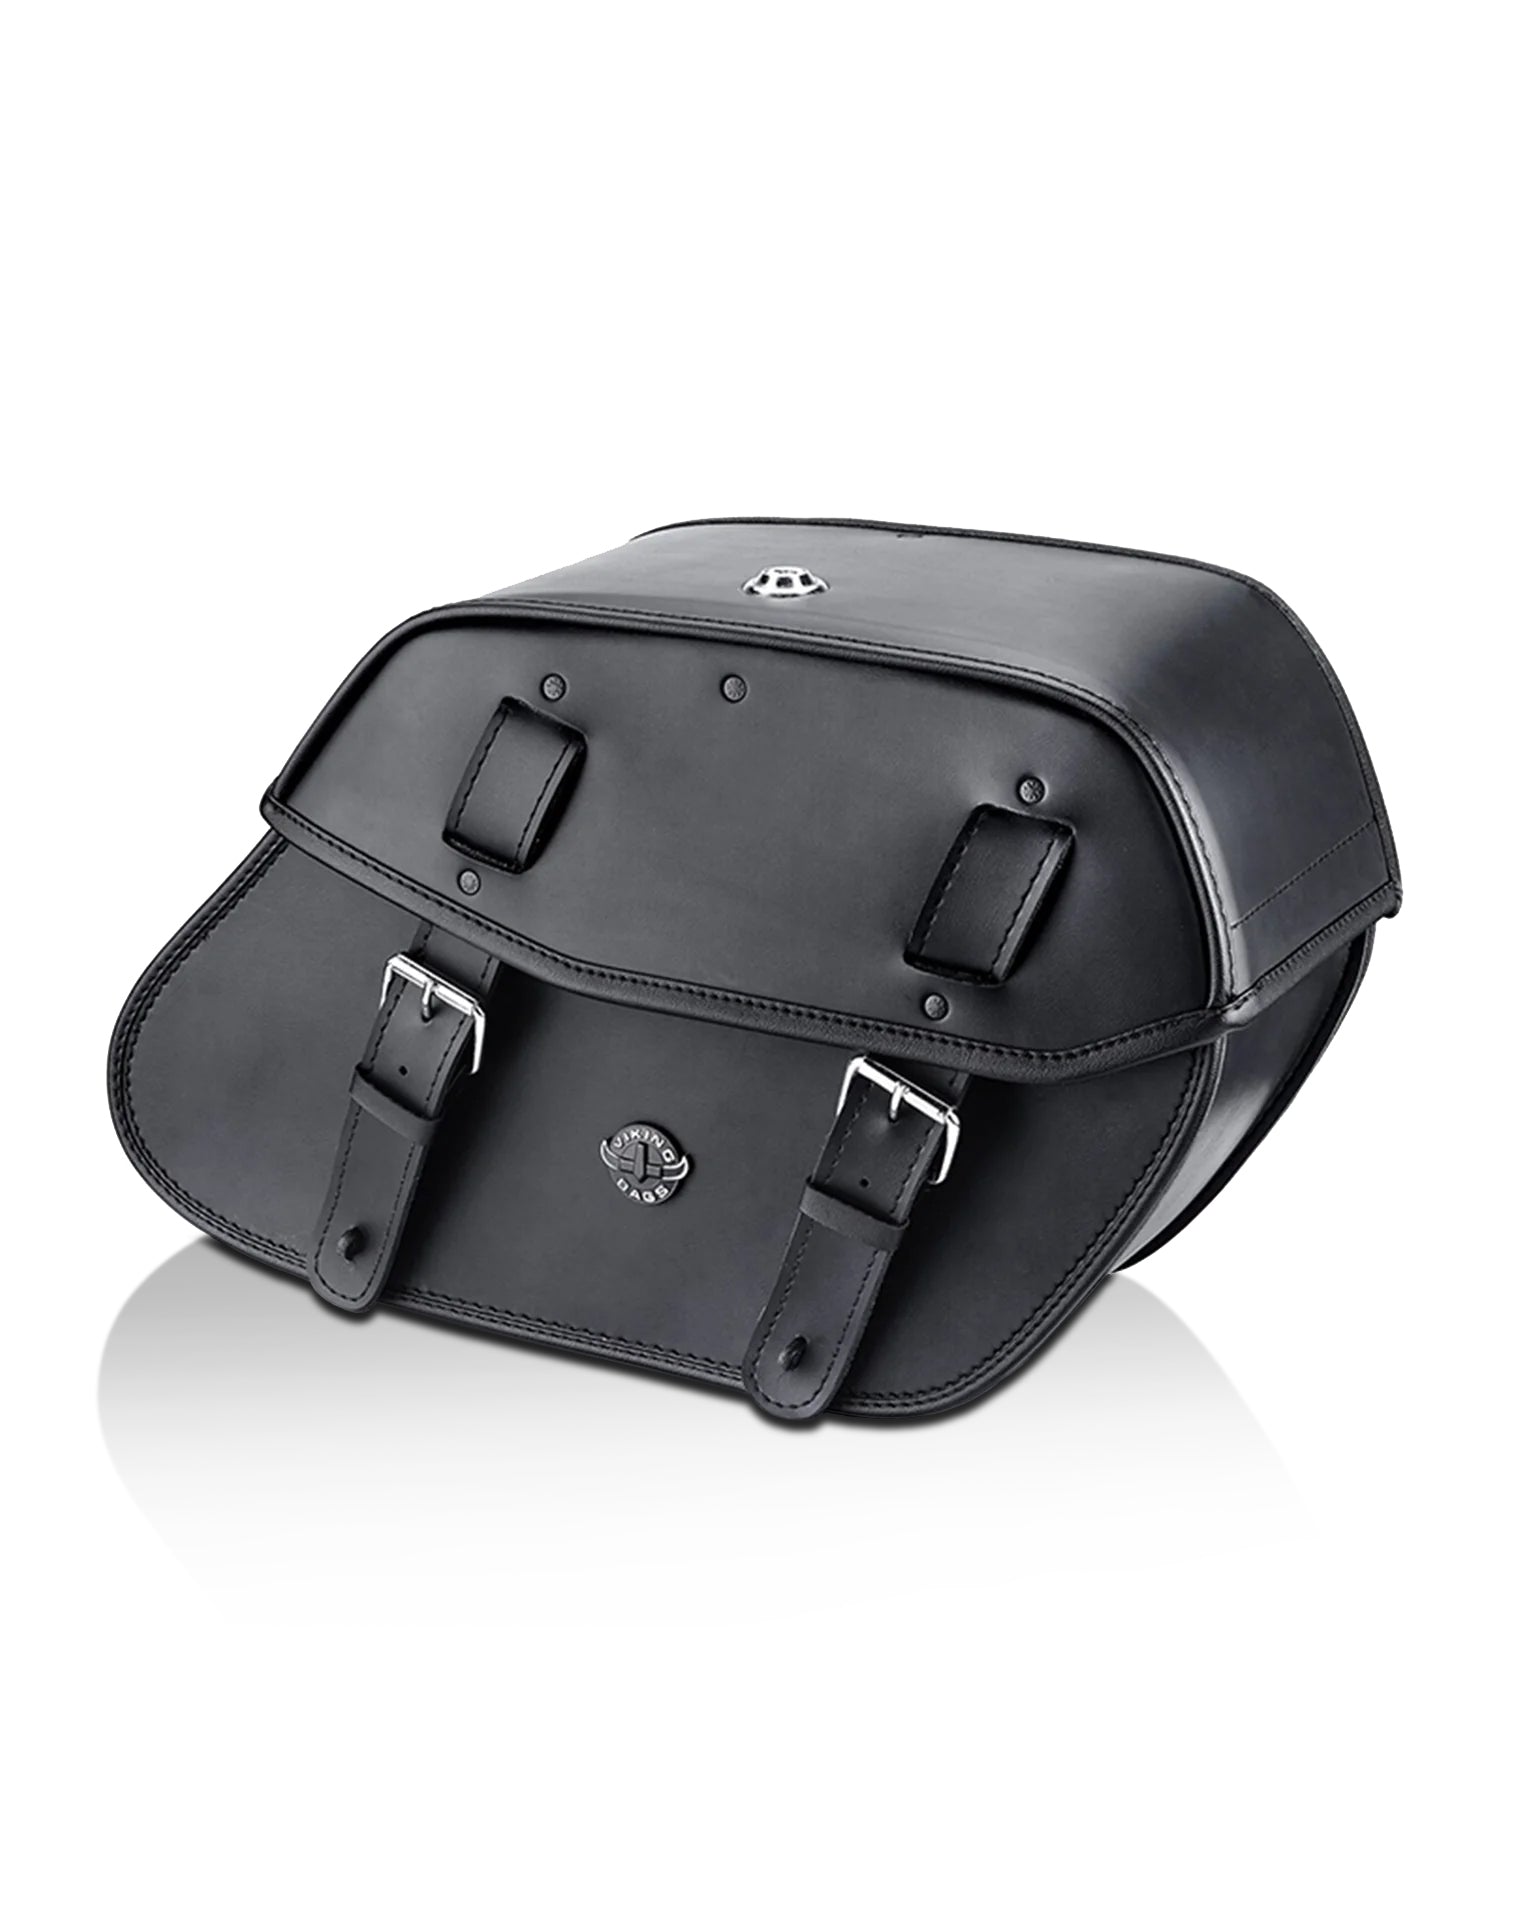 Viking Odin Large Leather Motorcycle Saddlebags For Harley Softail Fat Boy Lo Flstfb Main View